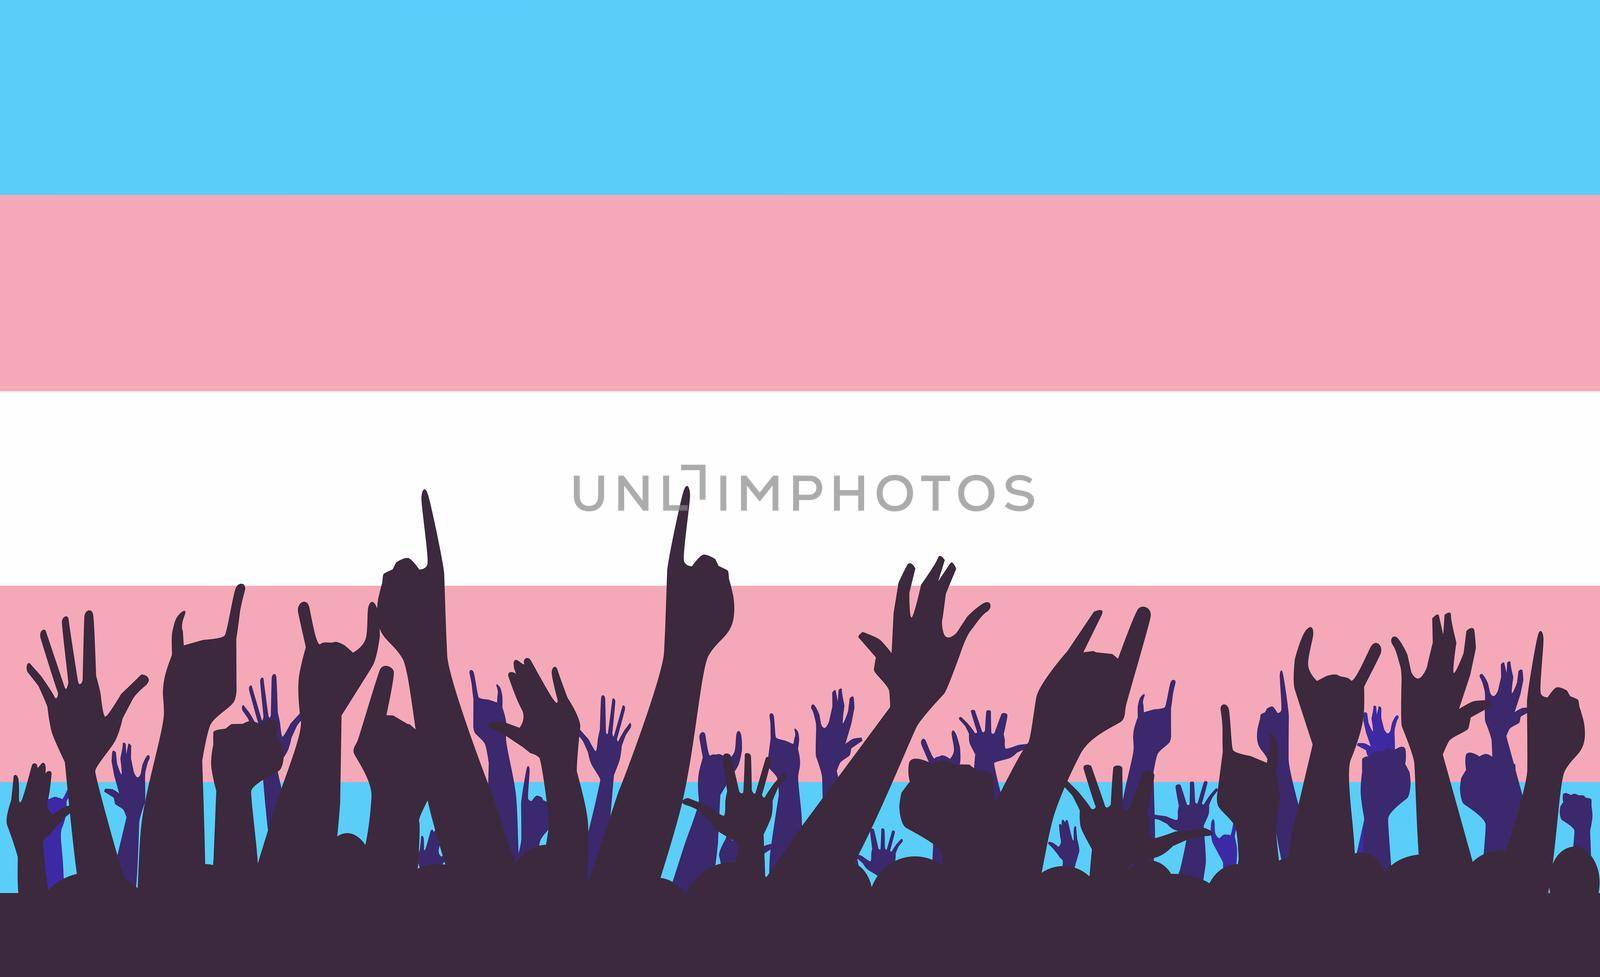 The transgender pride flag in pastel blue pink and white as a background with waving hands in silhouette